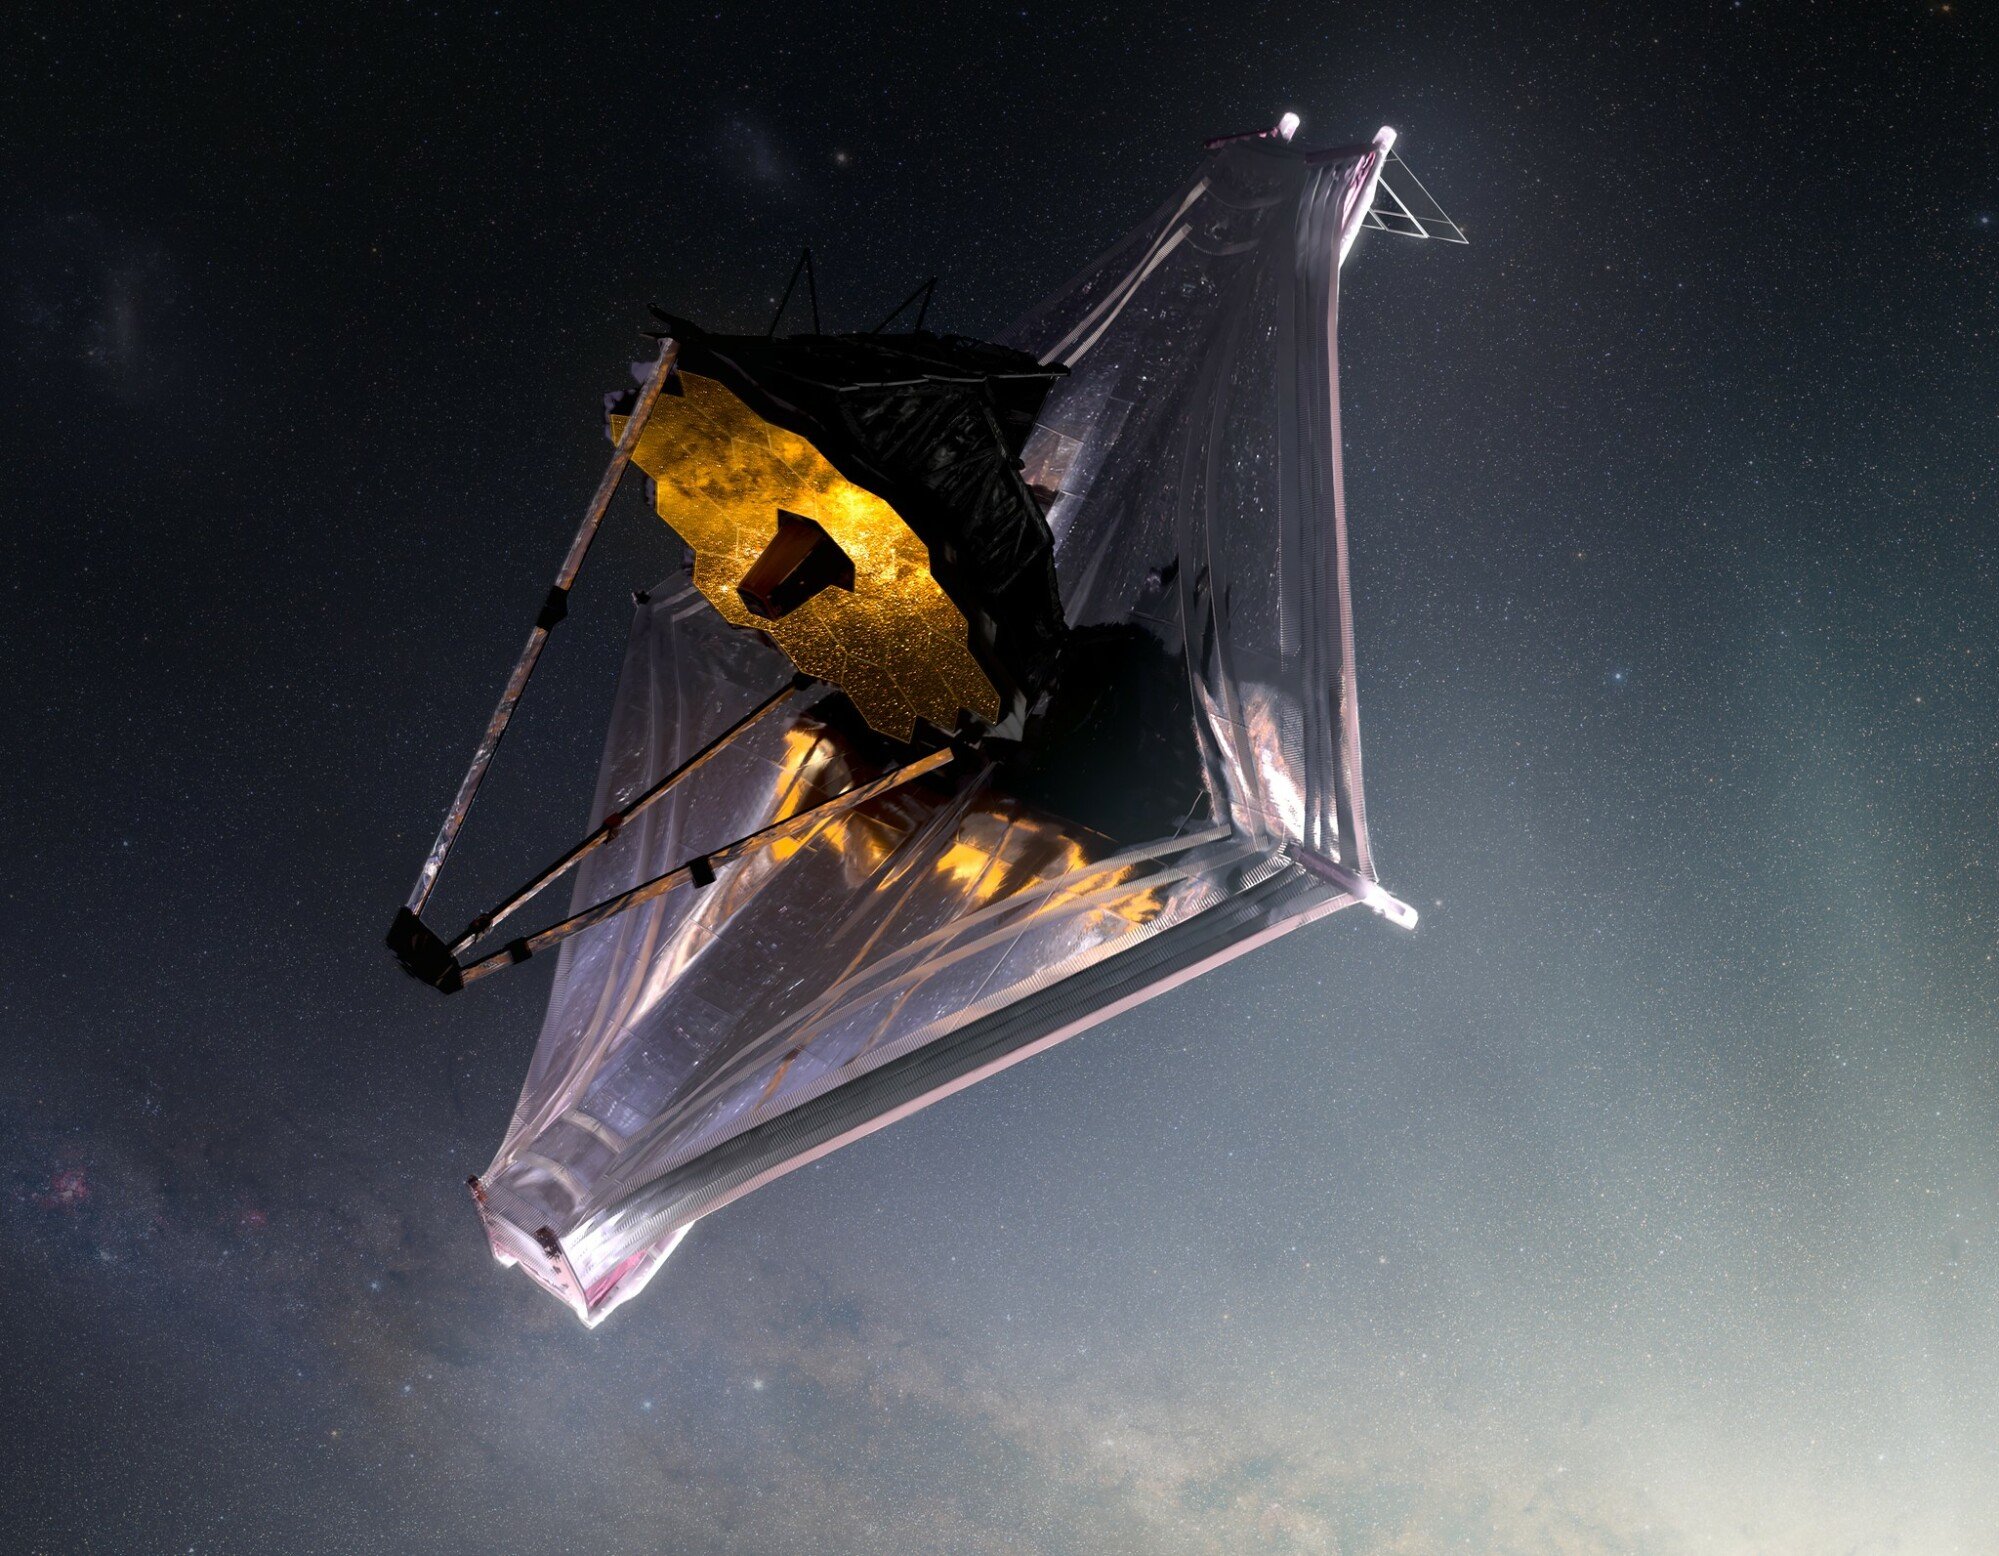 An artist's conception of the James Webb Space Telescope viewing the cosmos with its giant mirror.